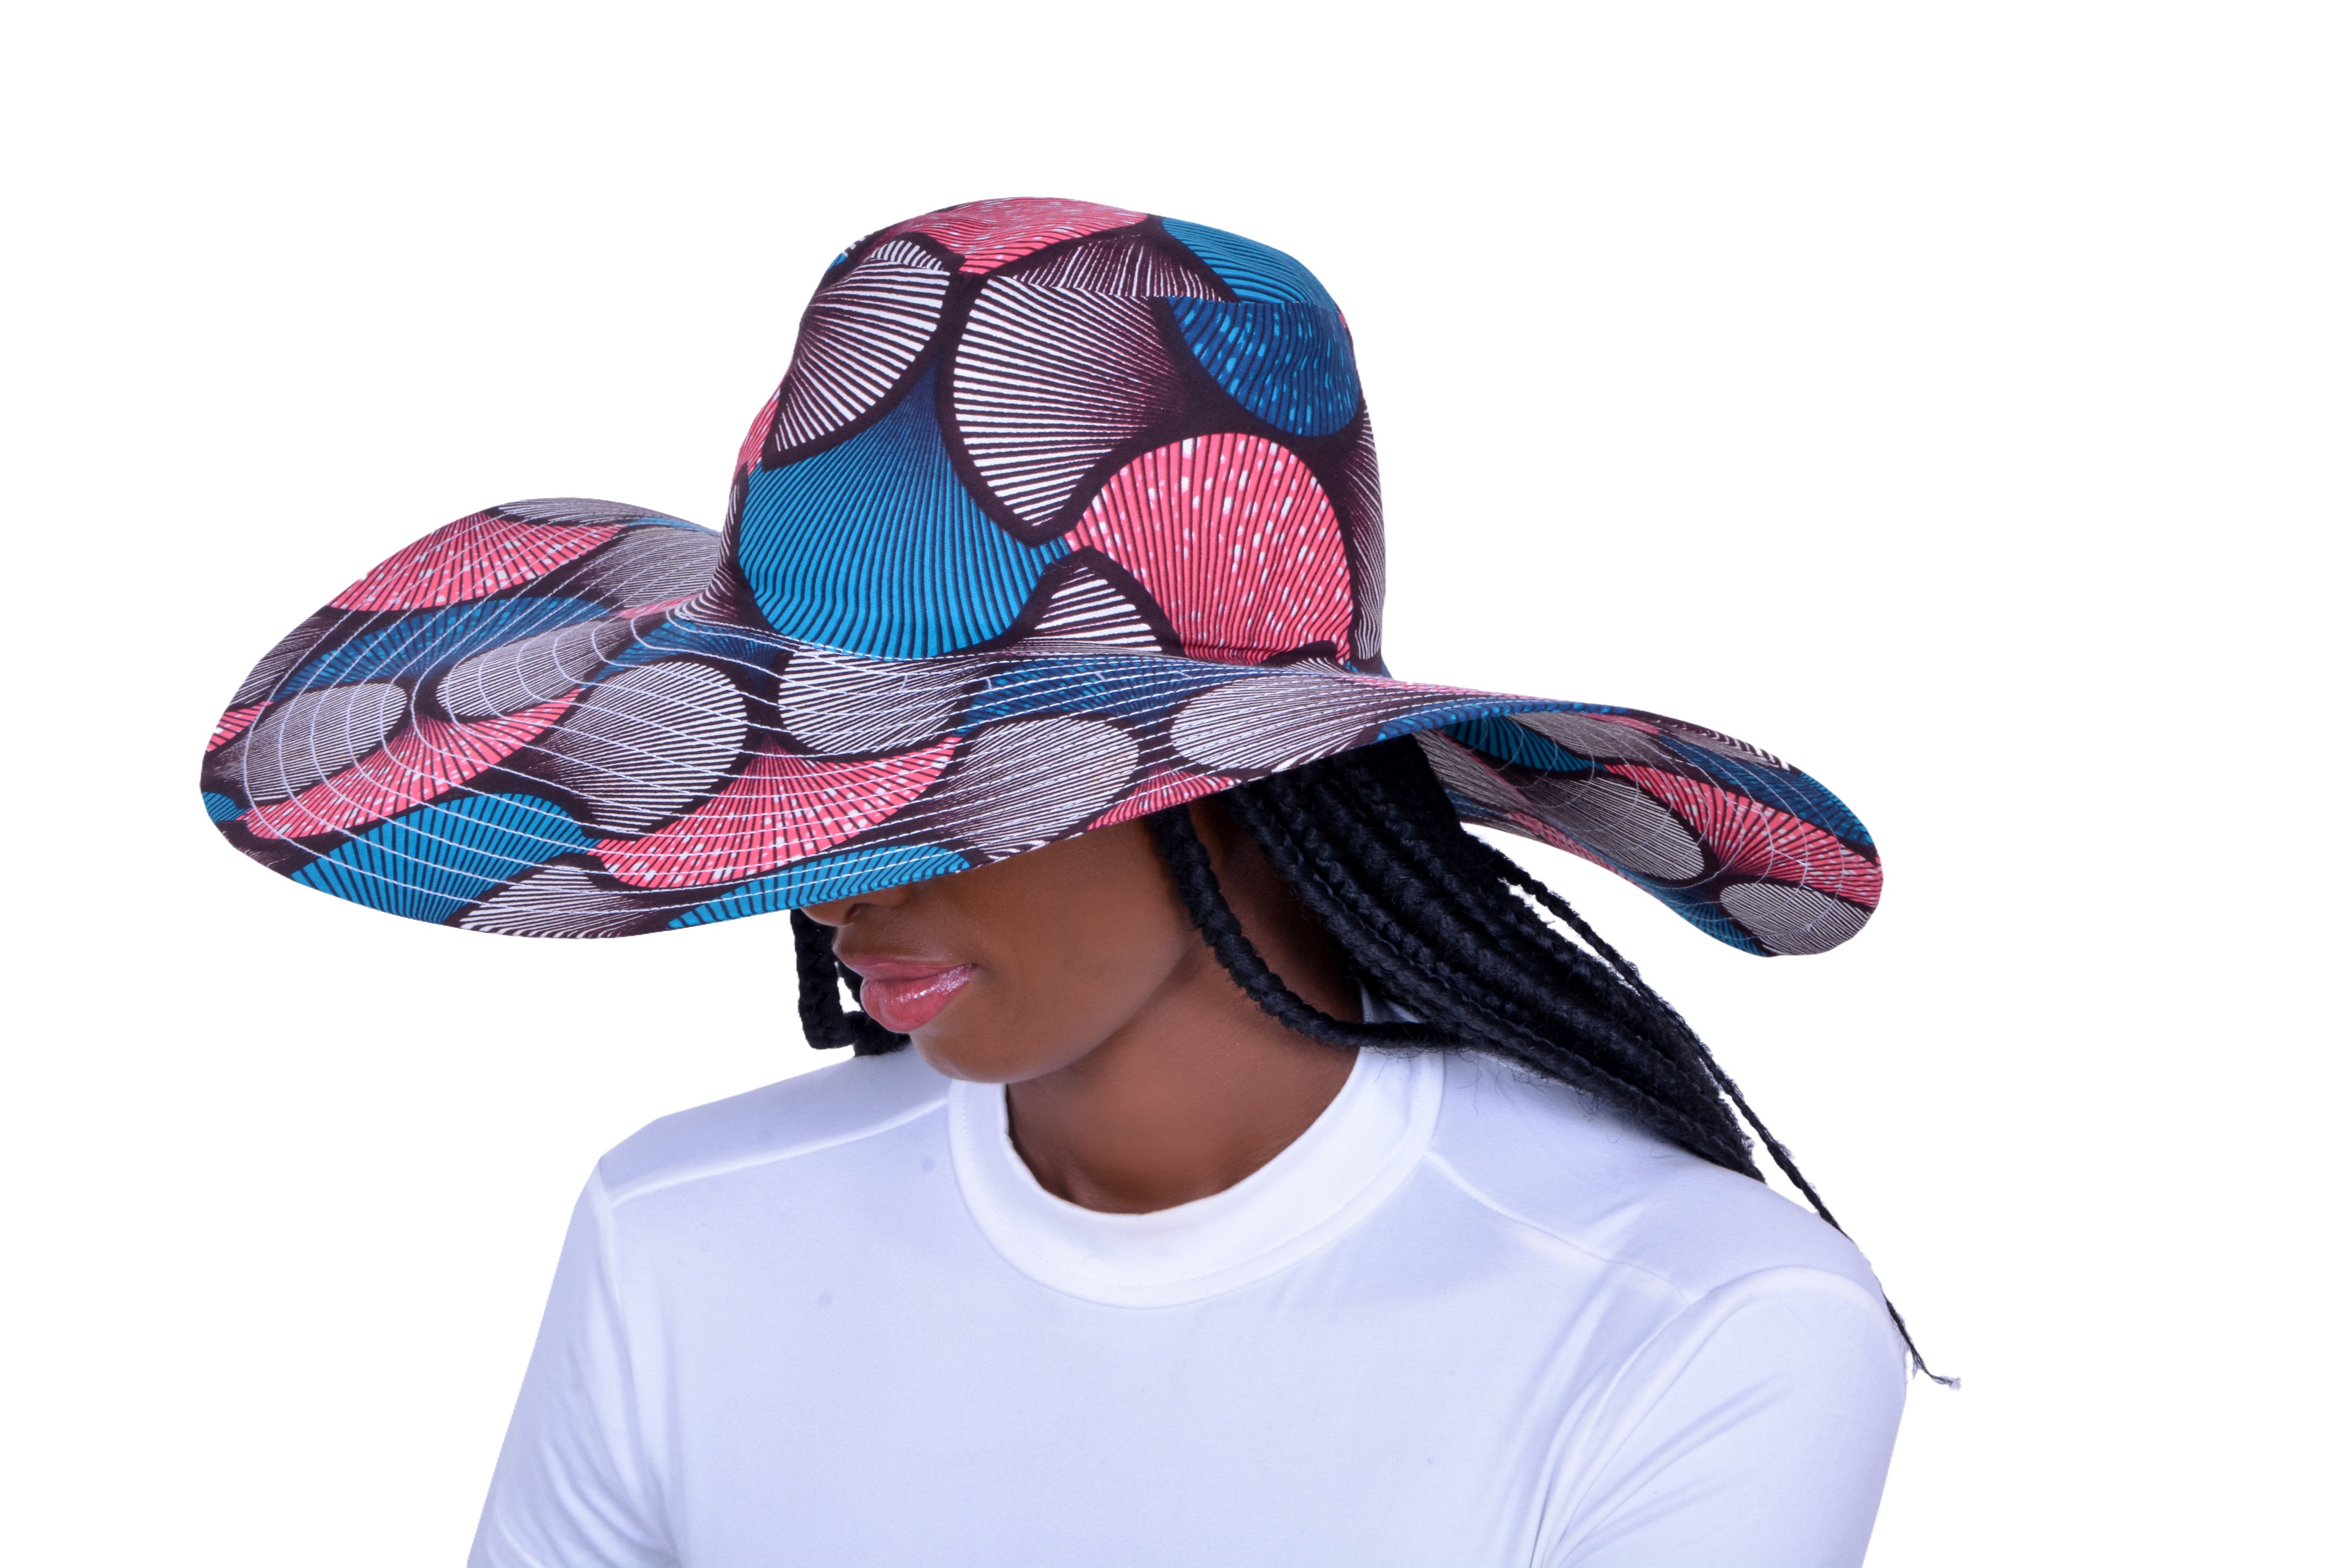 Jollo Uyoga Modern African Hat: let comfort and style give you the best shade.